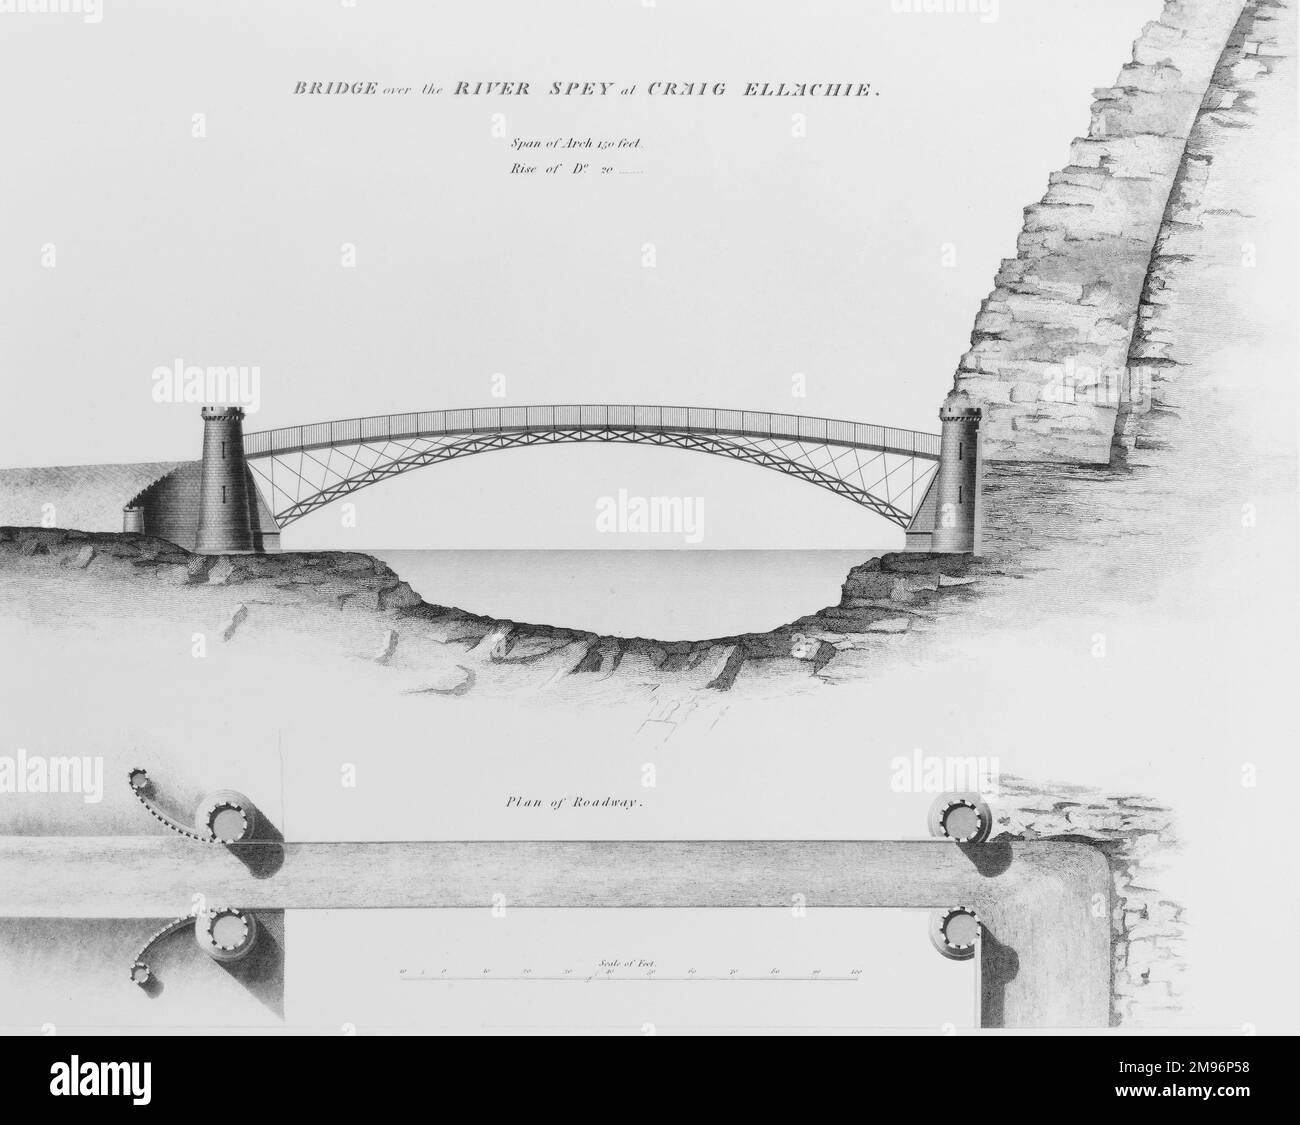 A Technical drawing of the spectacular Craig Ellachie bridge over the River Spey in the northeast of Scotland. The bridge was constructed between the years 1812 and 1814. Stock Photo